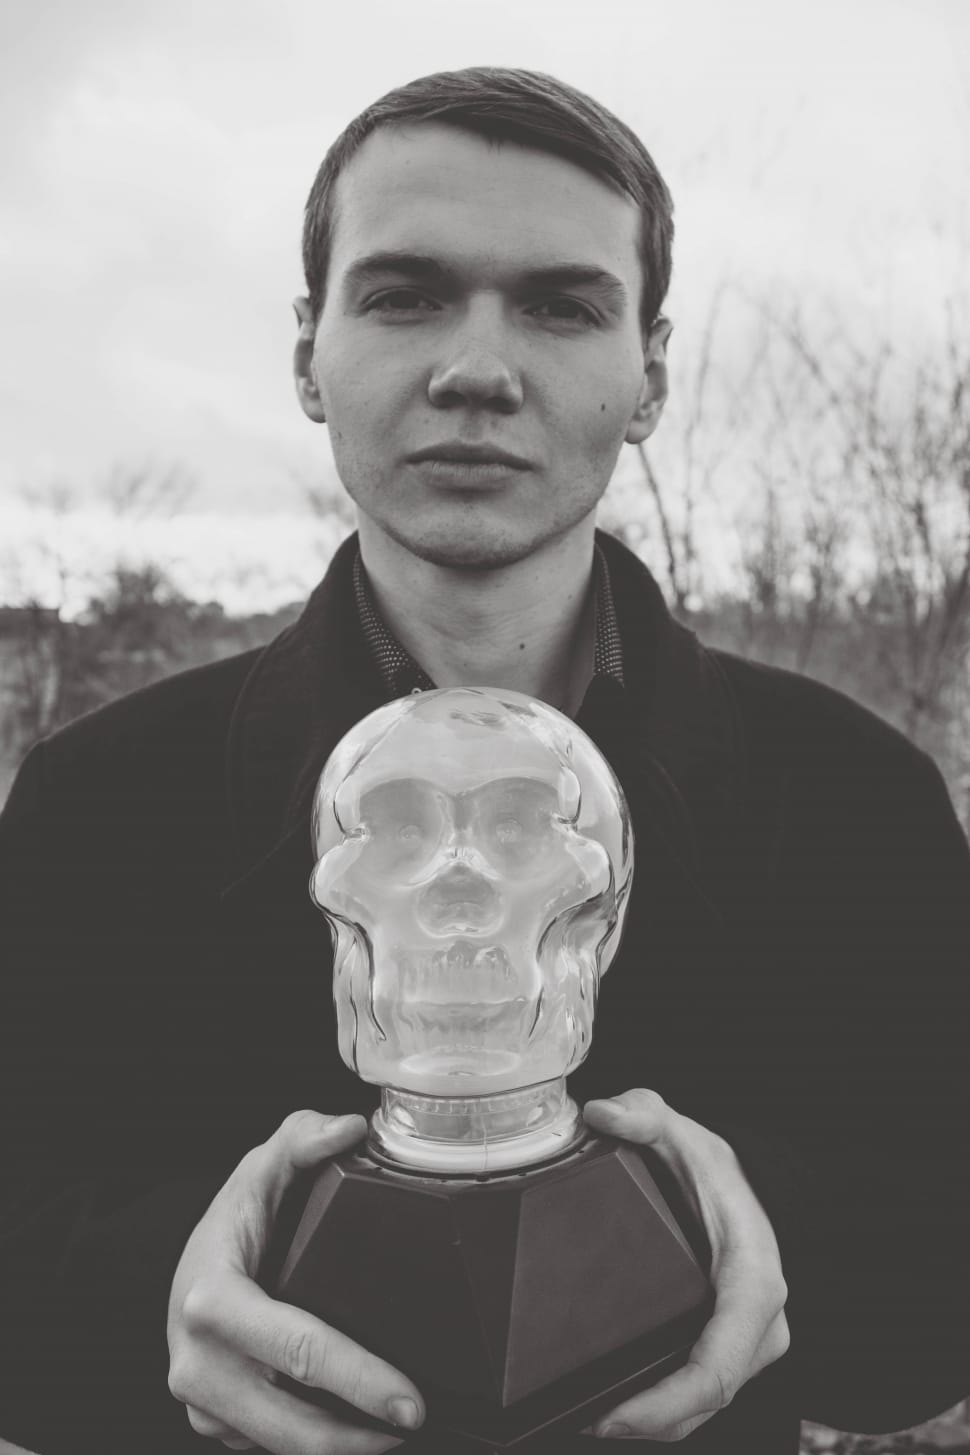 grayscale photo of a man in jacket holding a glass skull figurine during daytime preview